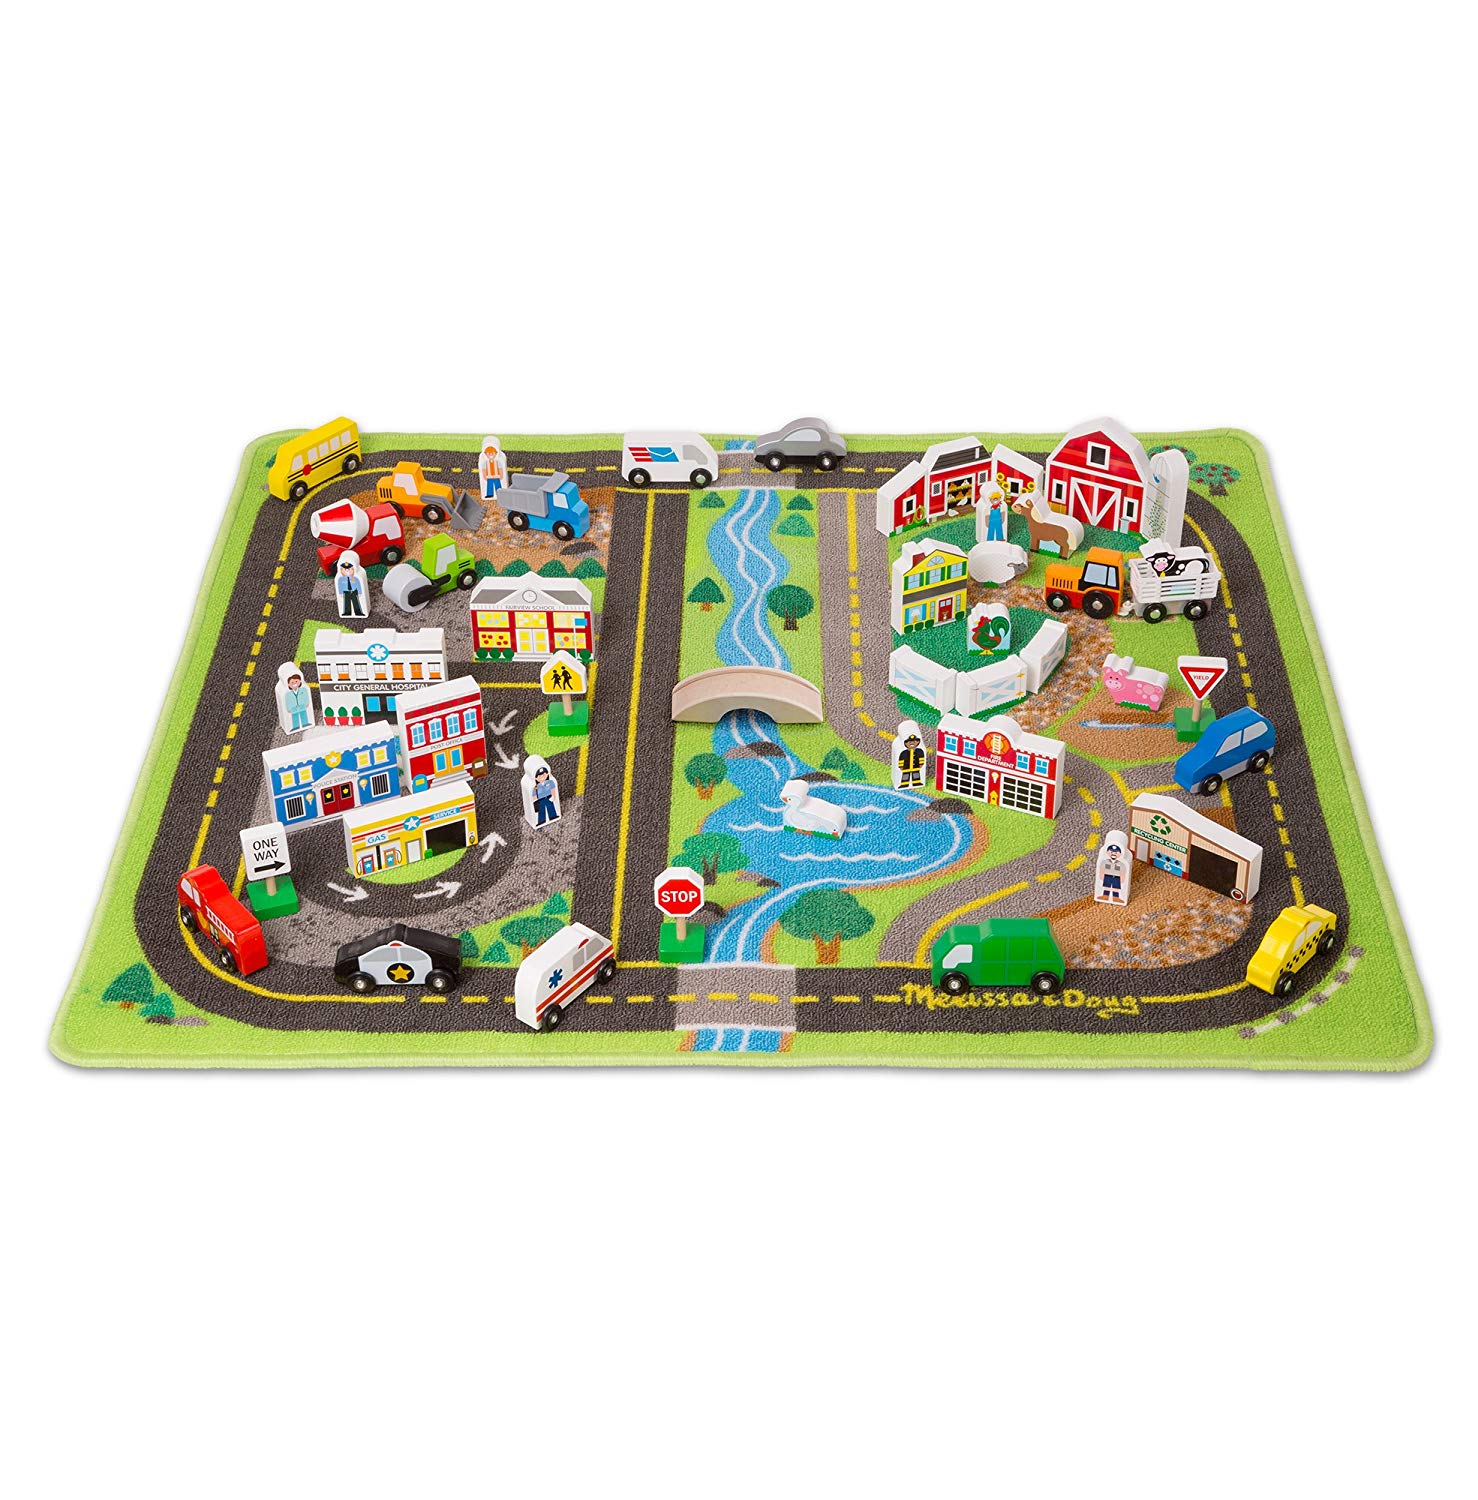 Melissa & Doug Deluxe Play Mat - Toy Set With Roads, Vehicles And Toy Parts